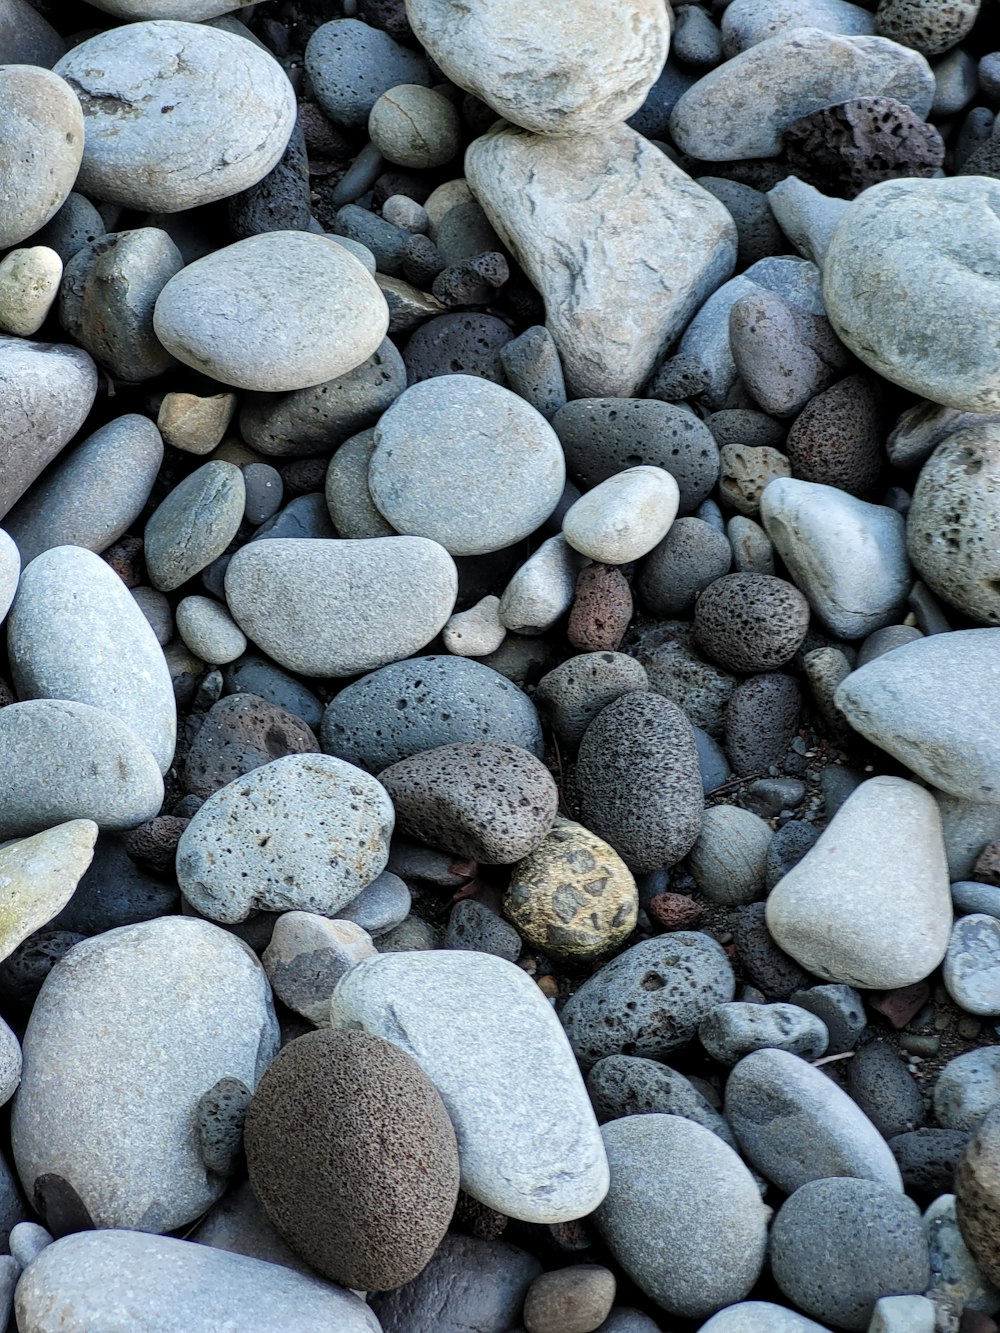 gray and white pebbles on the ground